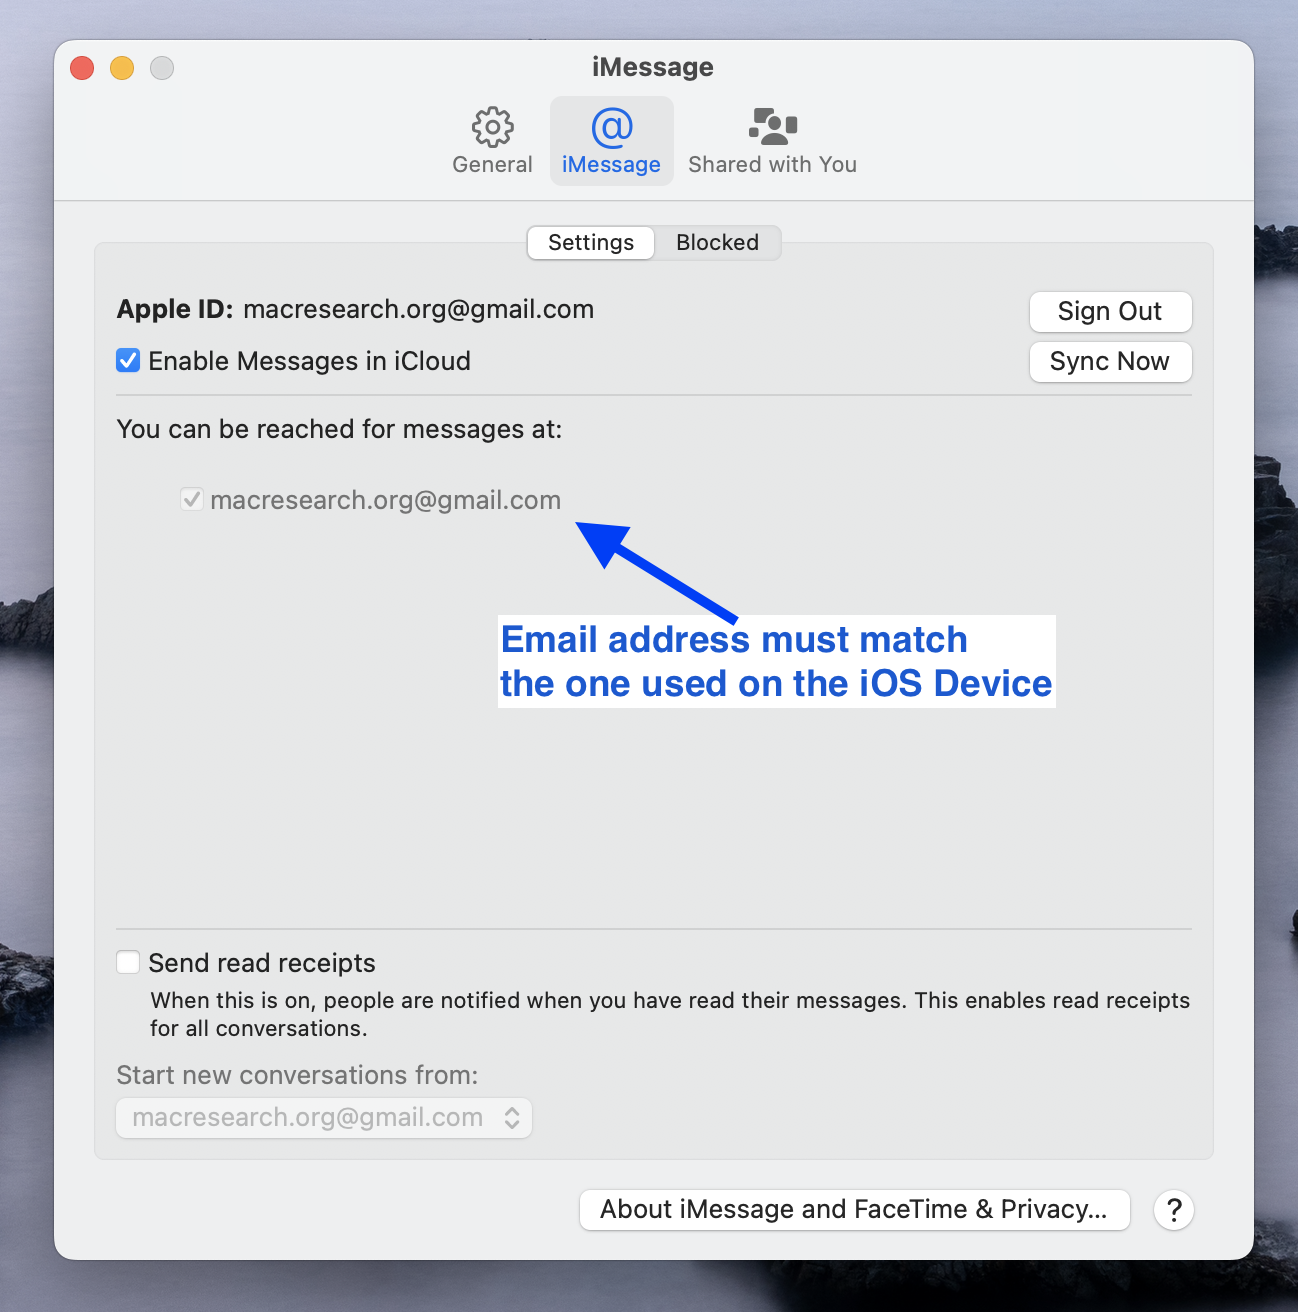 iMessage email